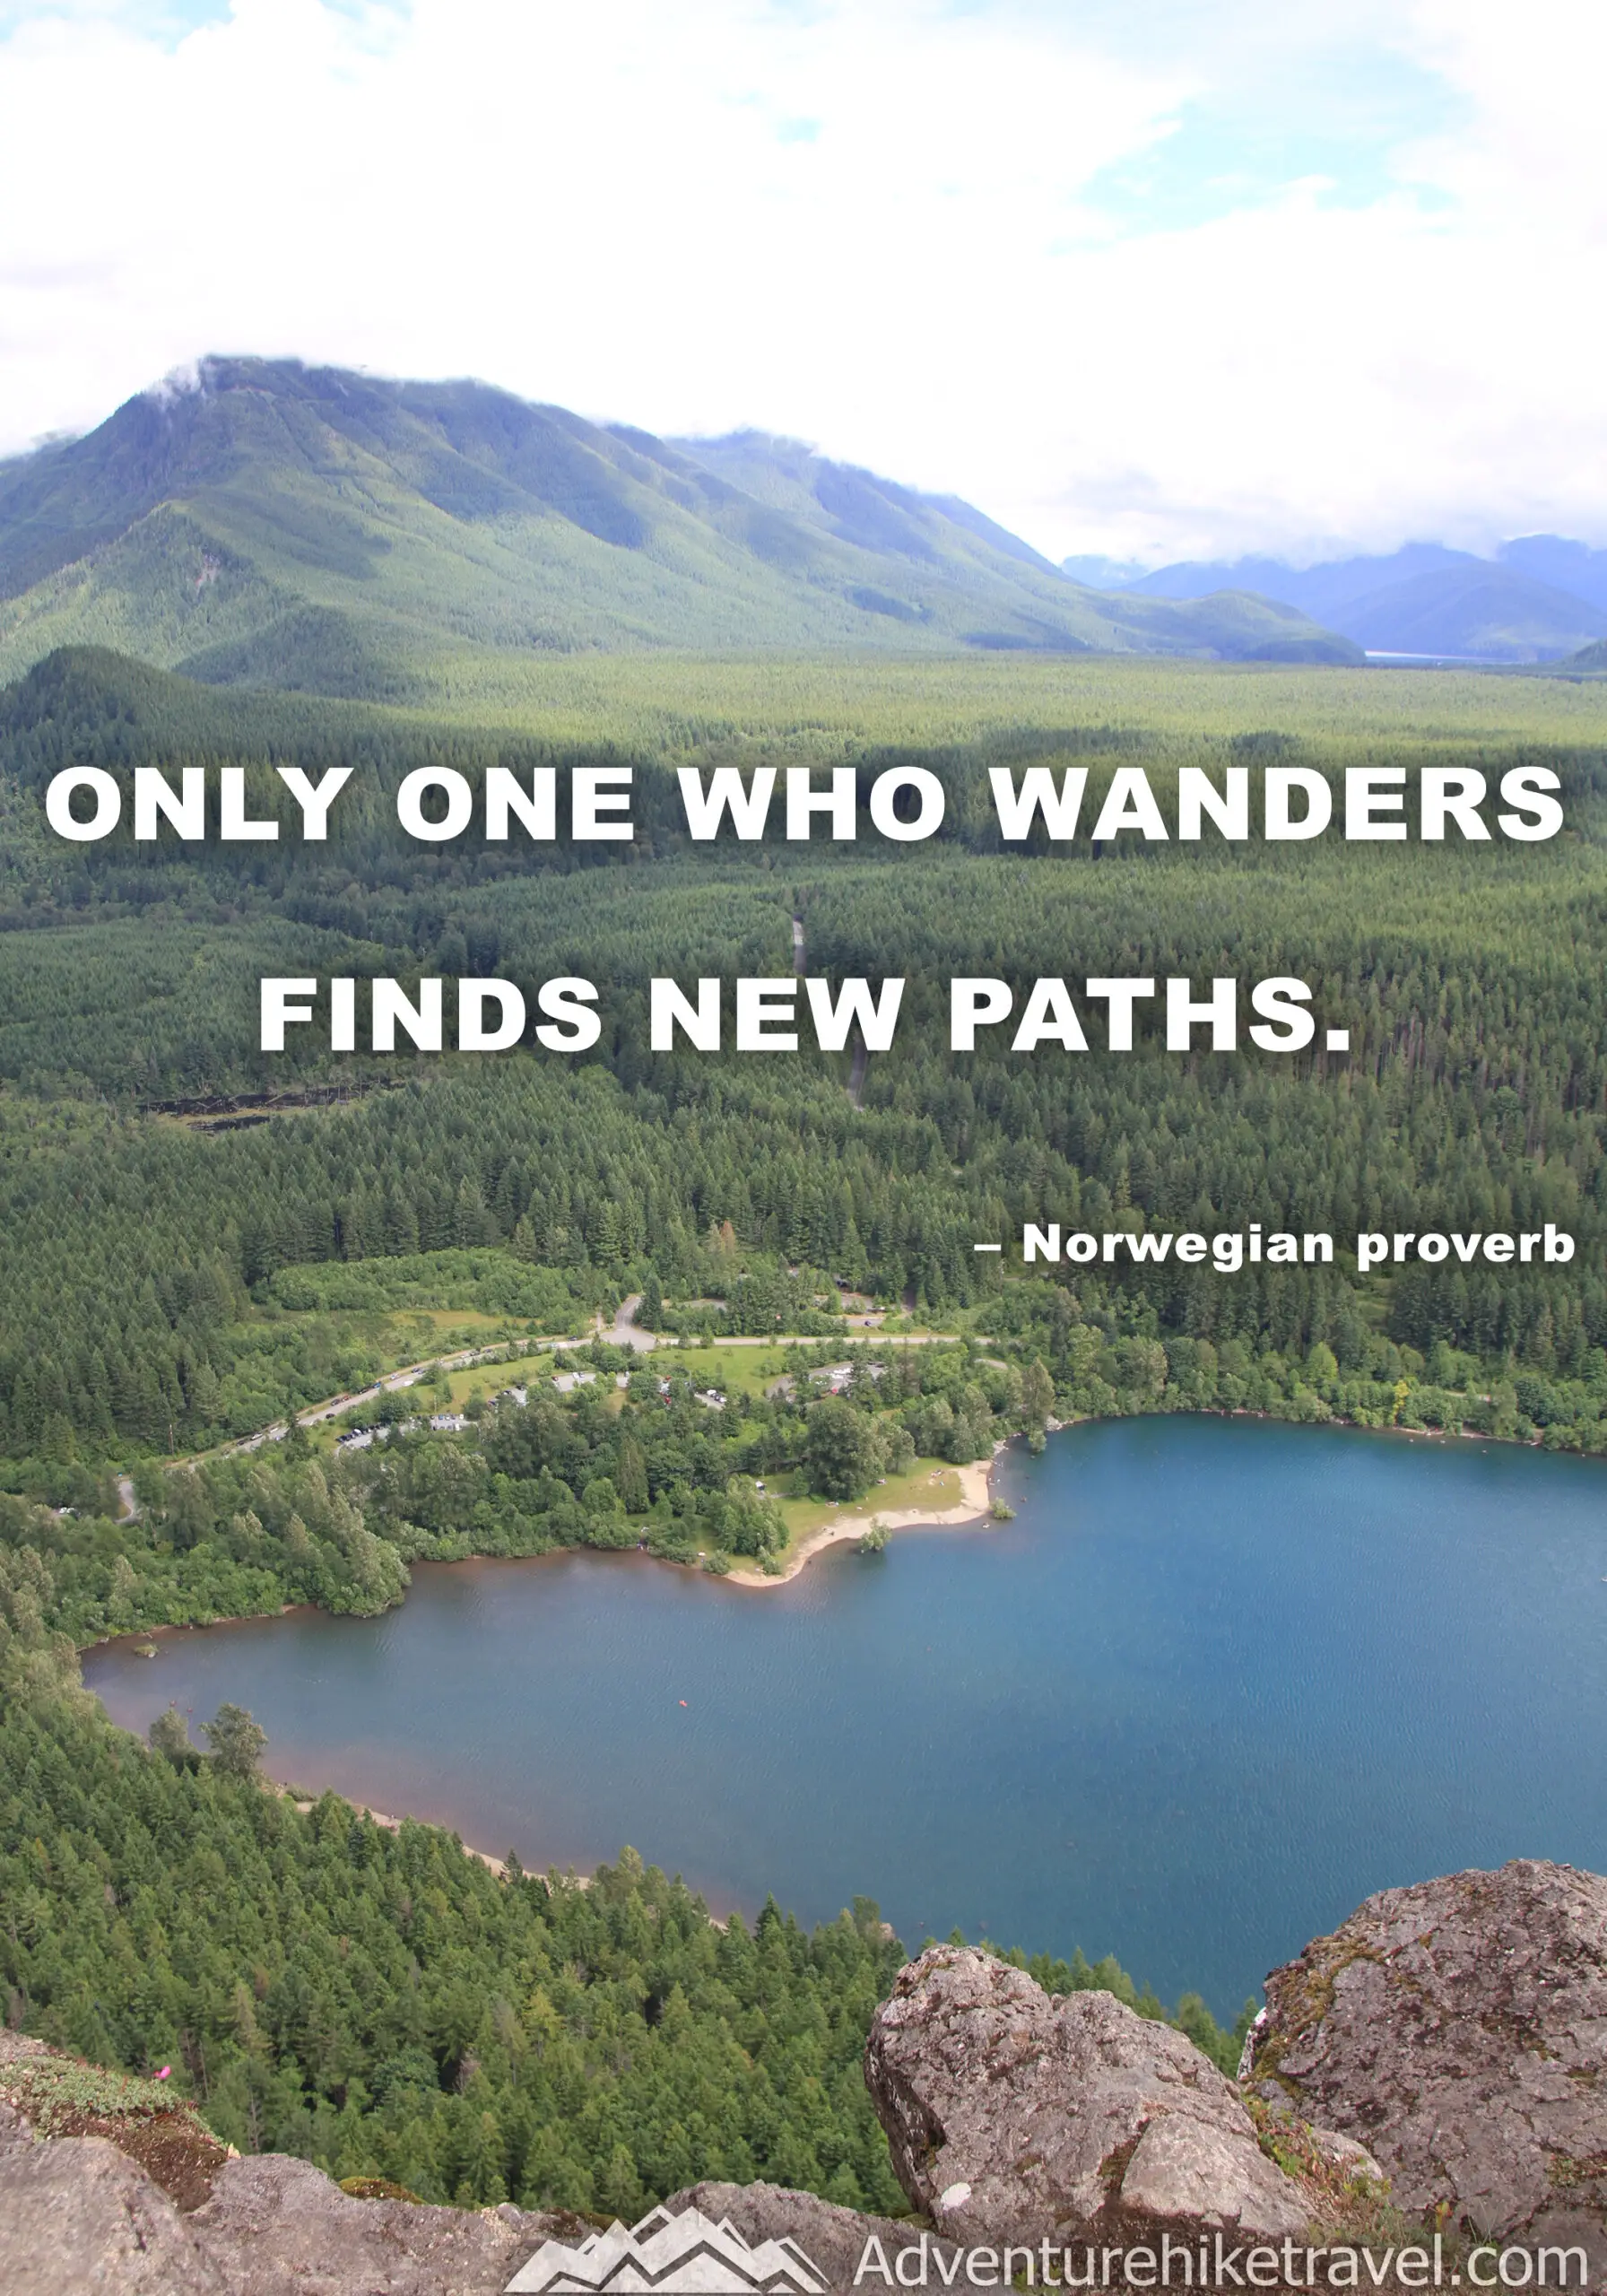 "Only one who wanders finds new paths." - Norwegian proverb #hiking #quotes #inspirationalquotes #hikingquotes #adventurequotes #outdoors #trekking